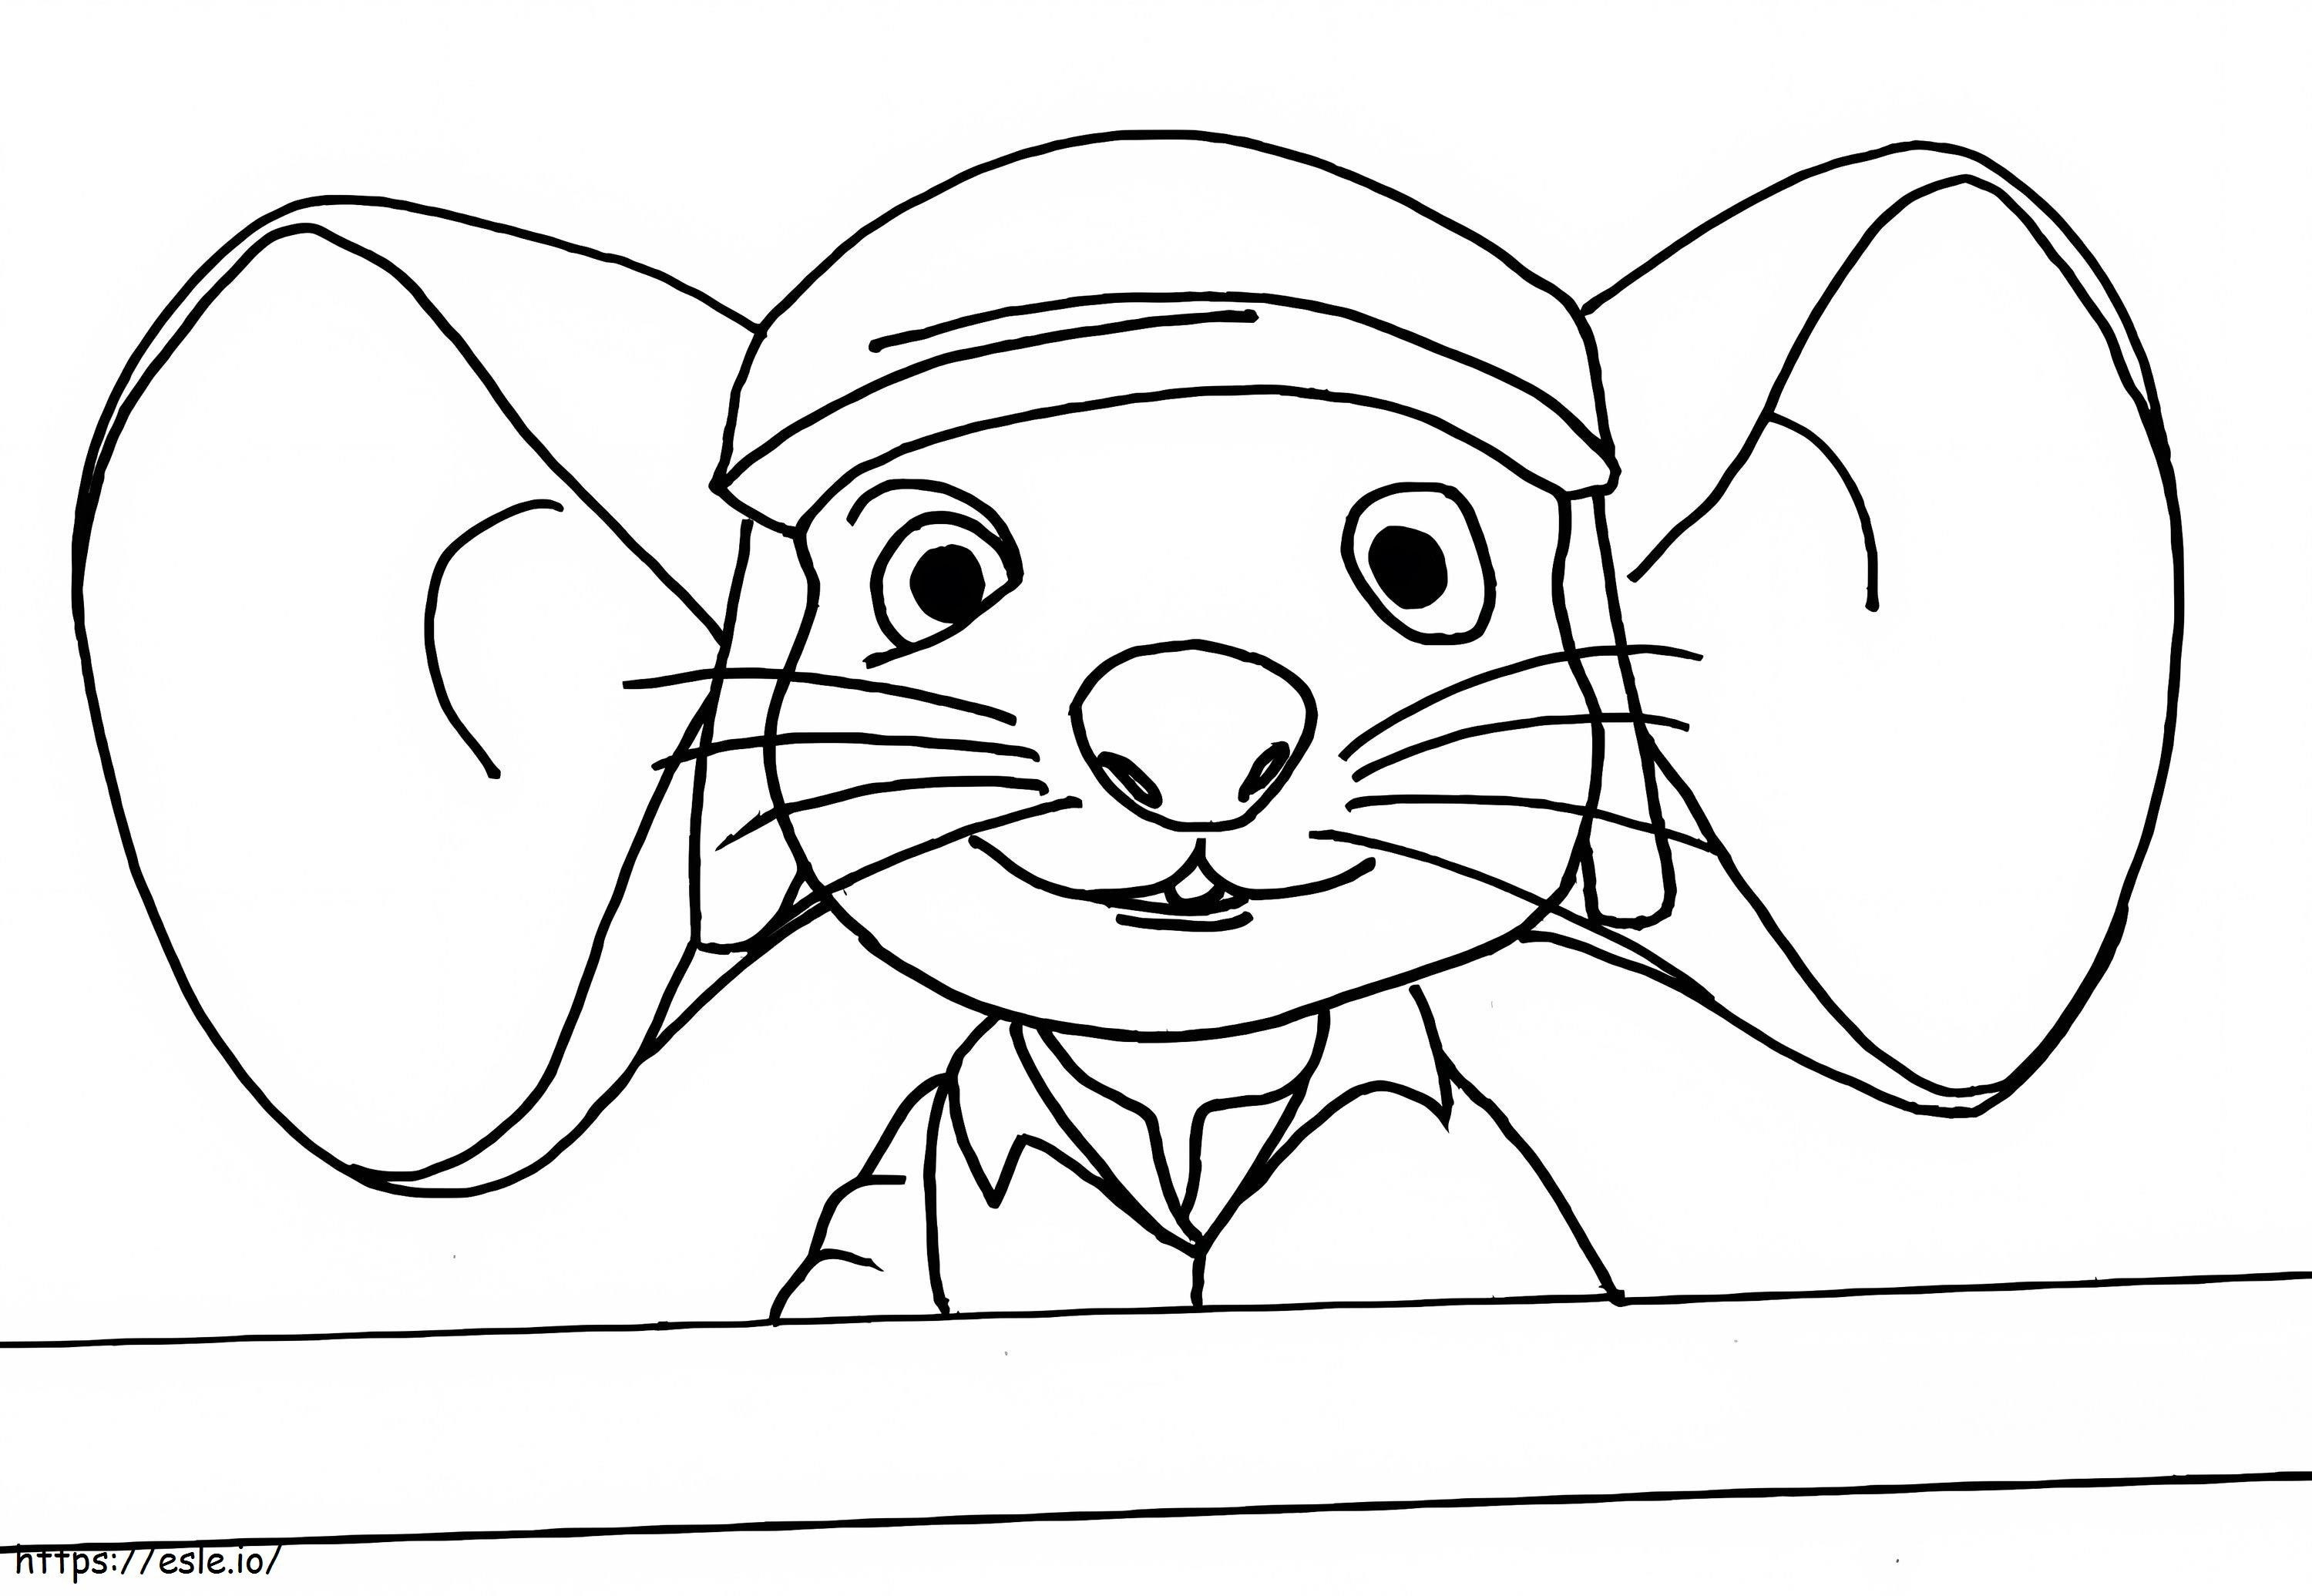 Lovely Despereaux coloring page